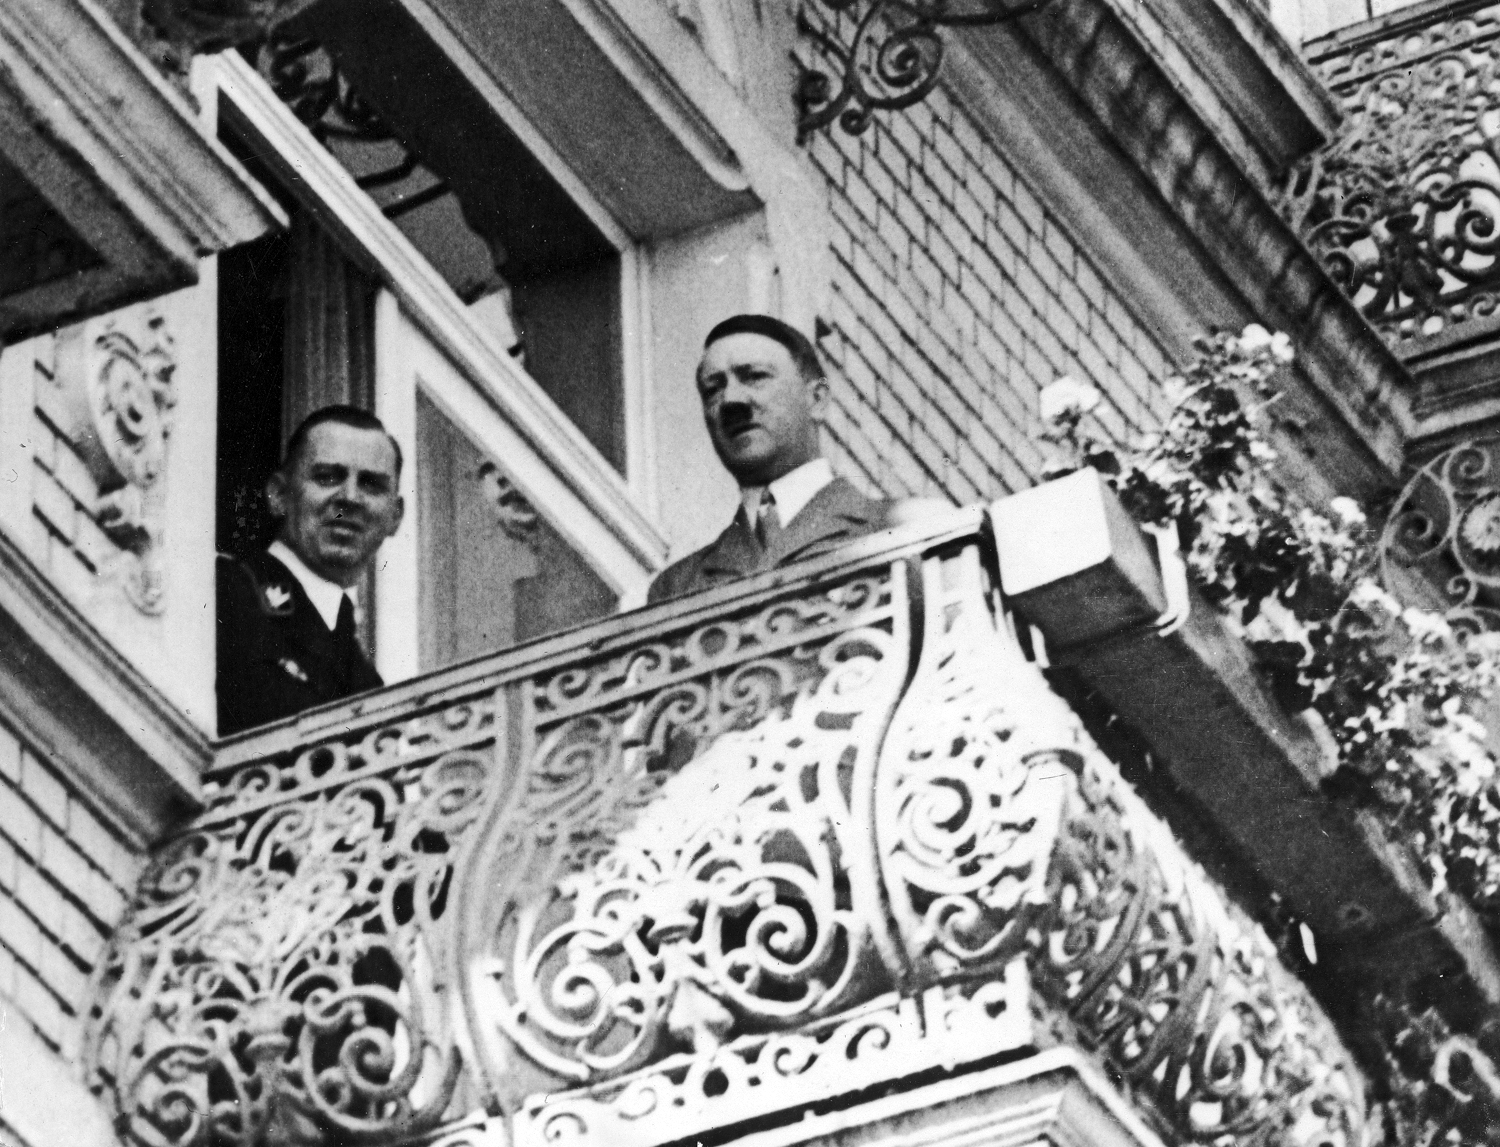 Adolf Hitler and Julius Schaub on the balcony of Hotel Dreesen in Bad Godesberg waiting for the arrival of Neville Chamberlain before their official meeting